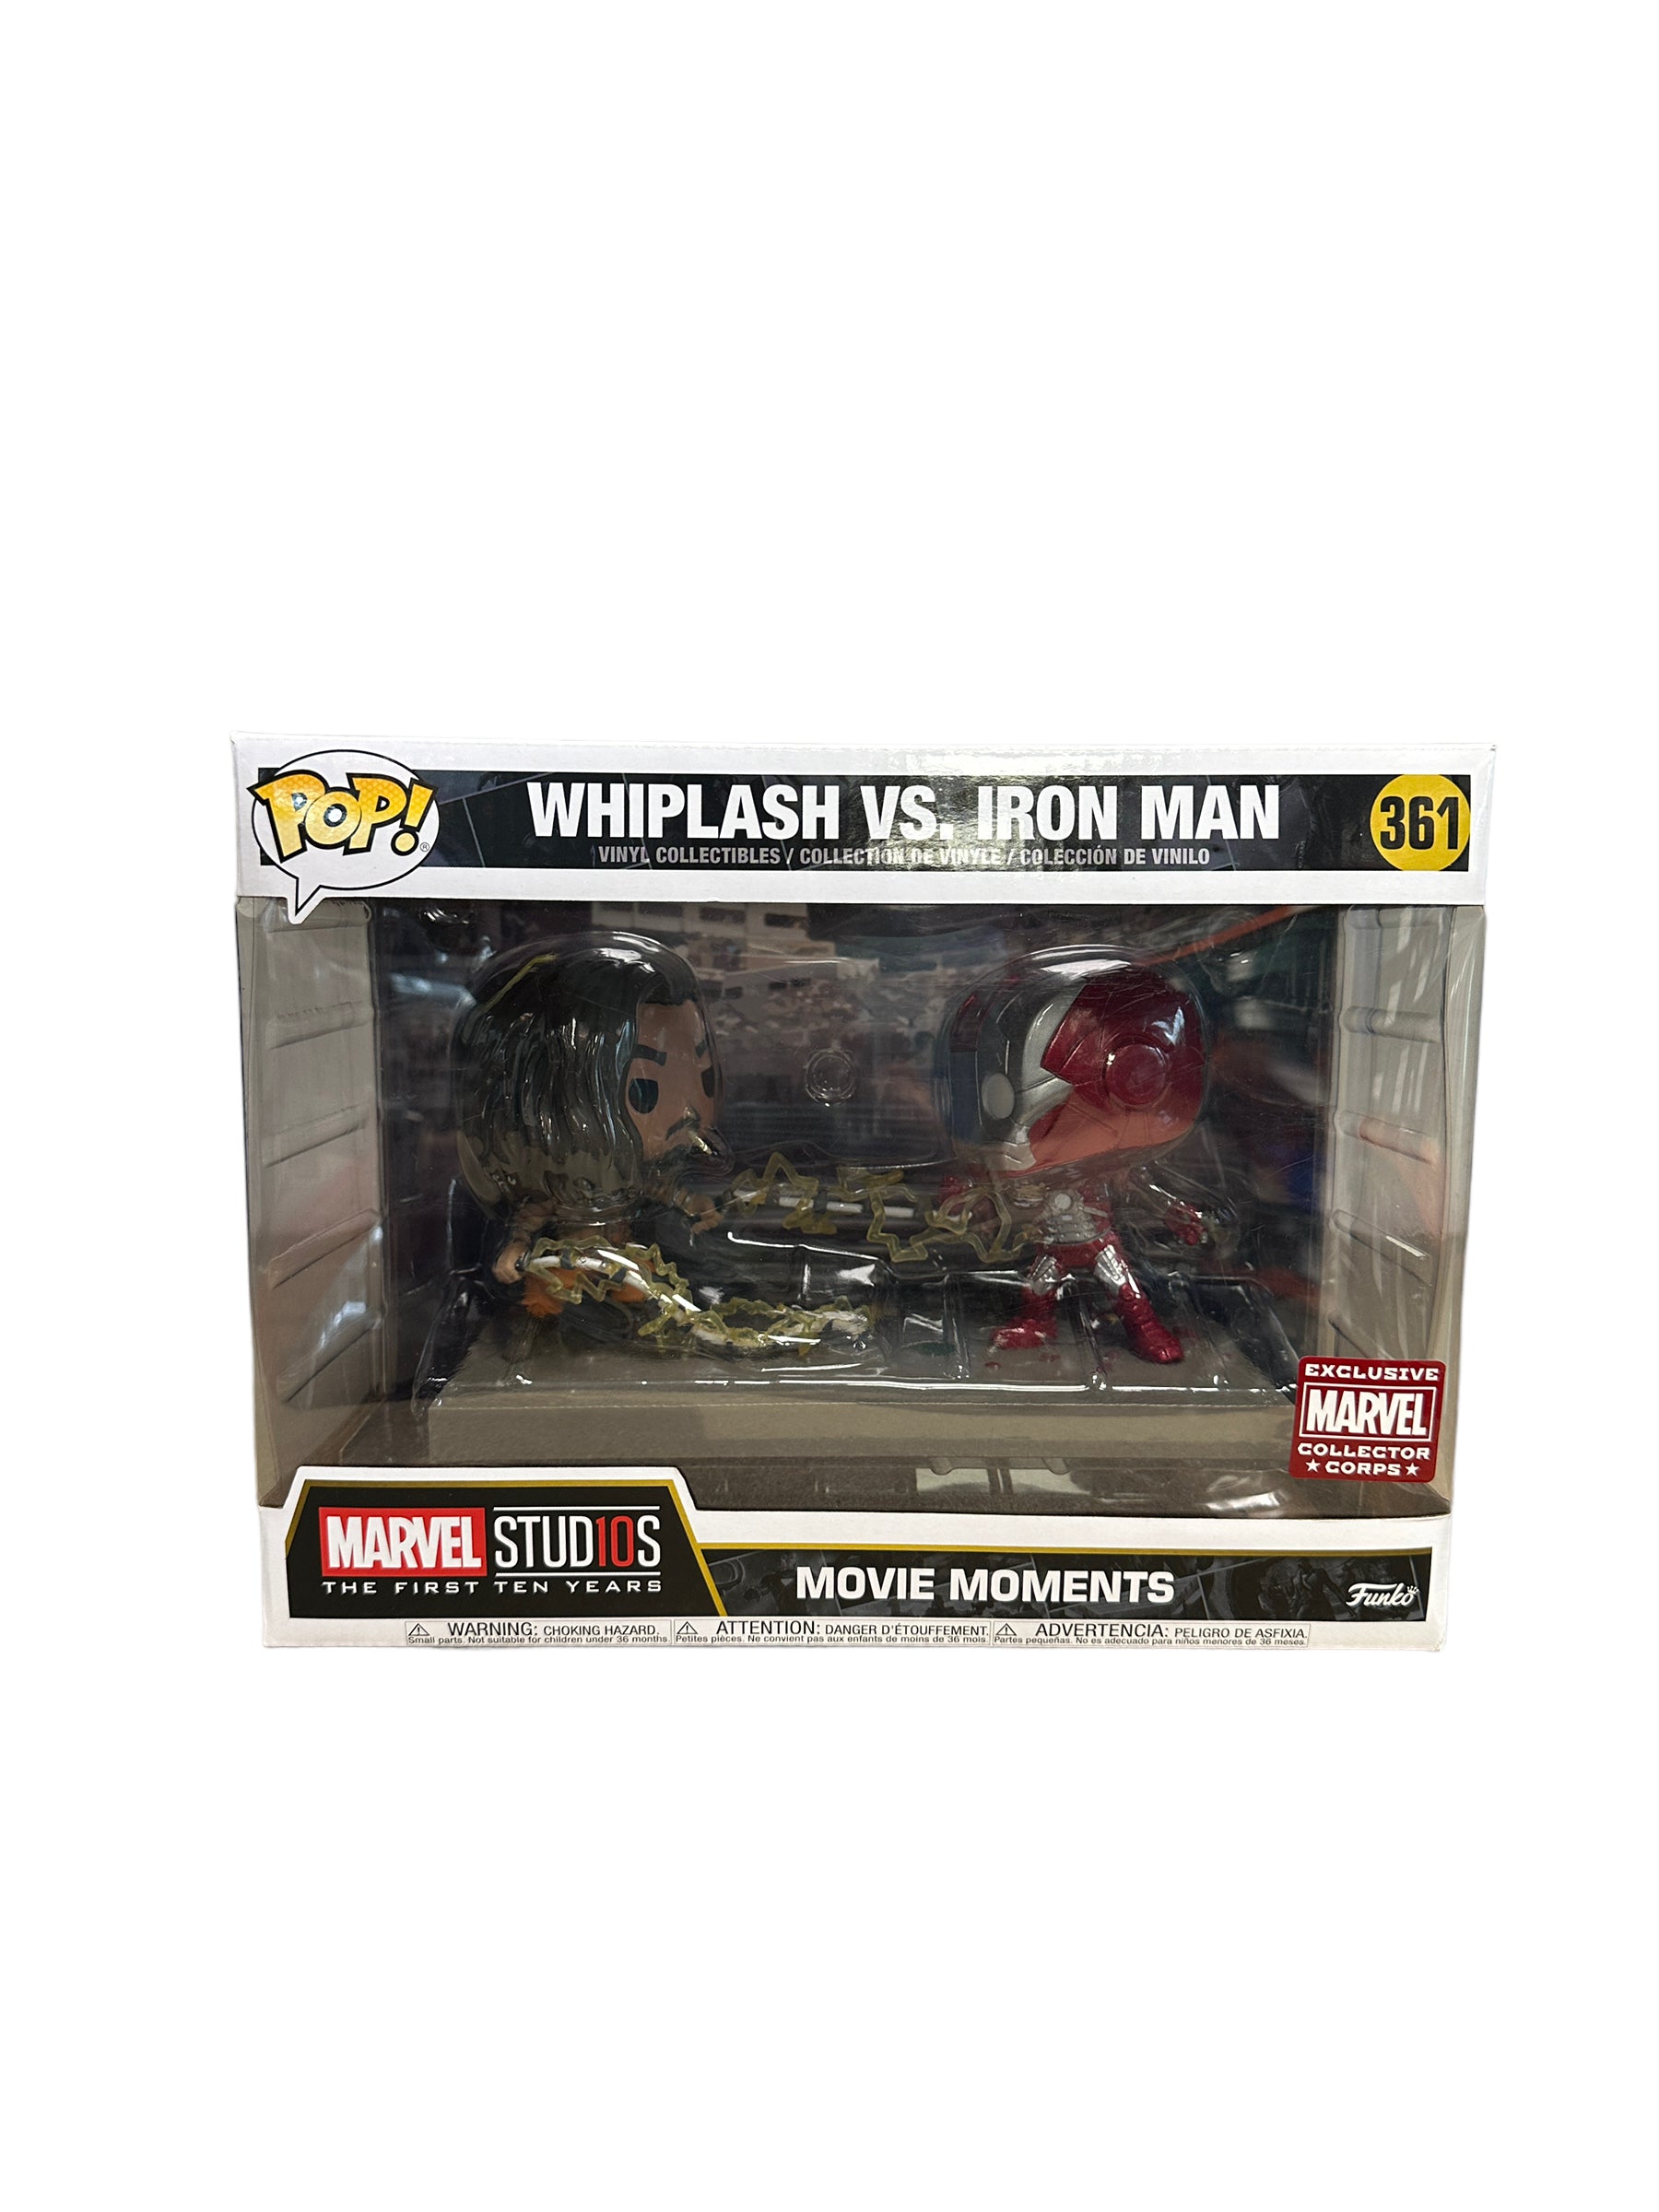 Whiplash Vs. Iron Man #361 Funko Pop Movie Moments! - Marvel Studios First Ten Years - Marvel Collector Corps Exclusive - Condition 7.5/10